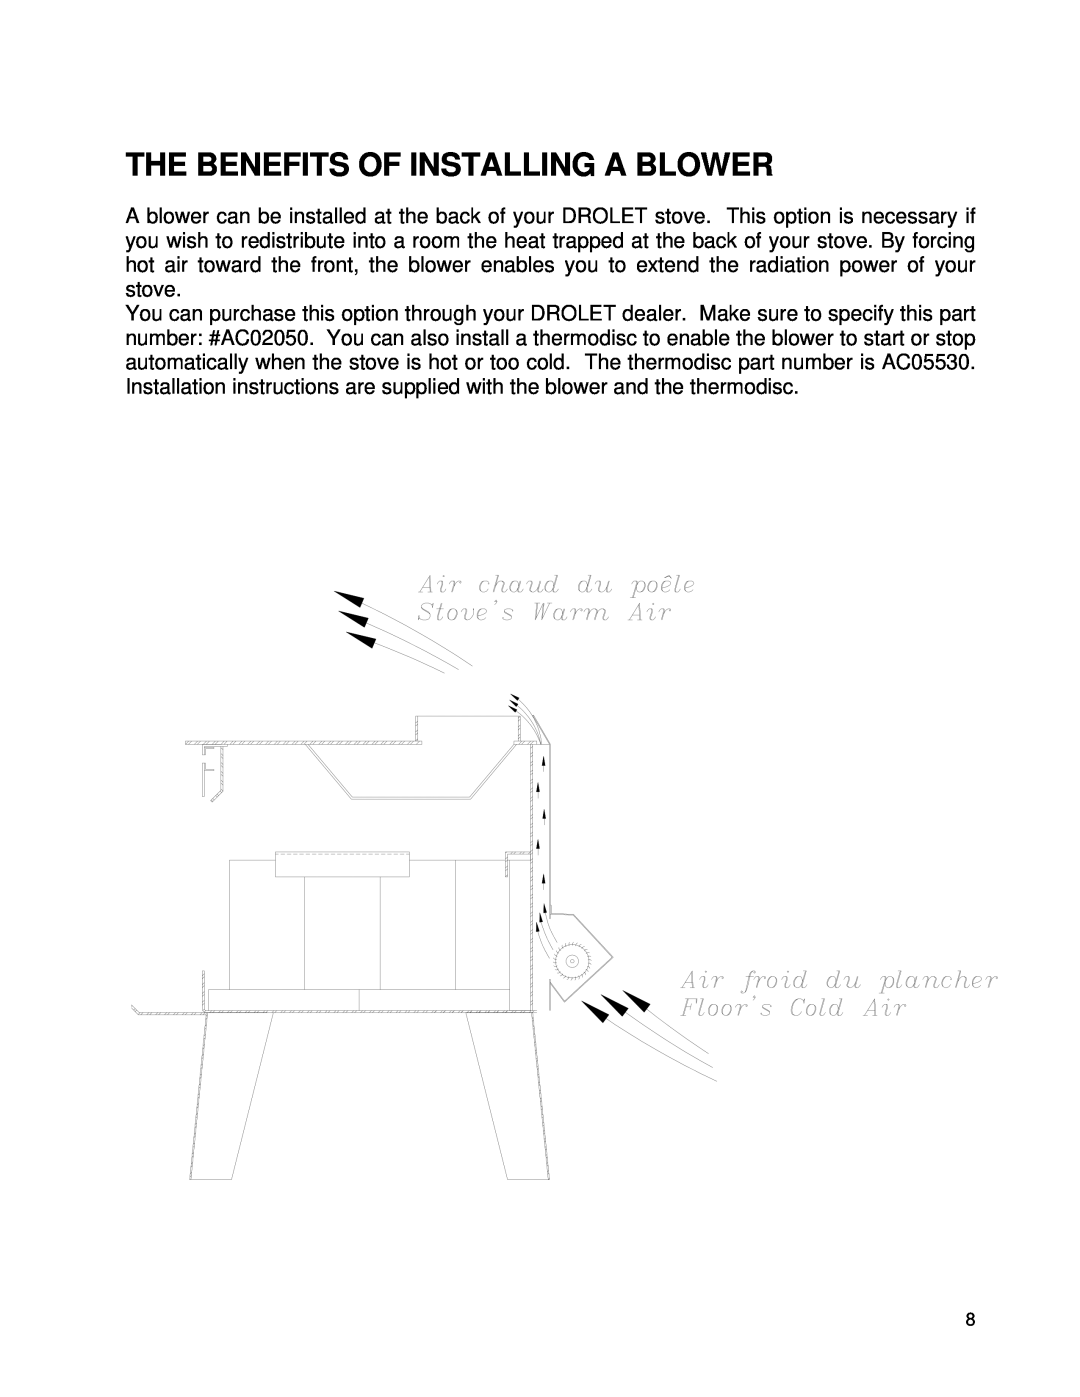 Drolet WOODSTOVES owner manual The Benefits Of Installing A Blower 